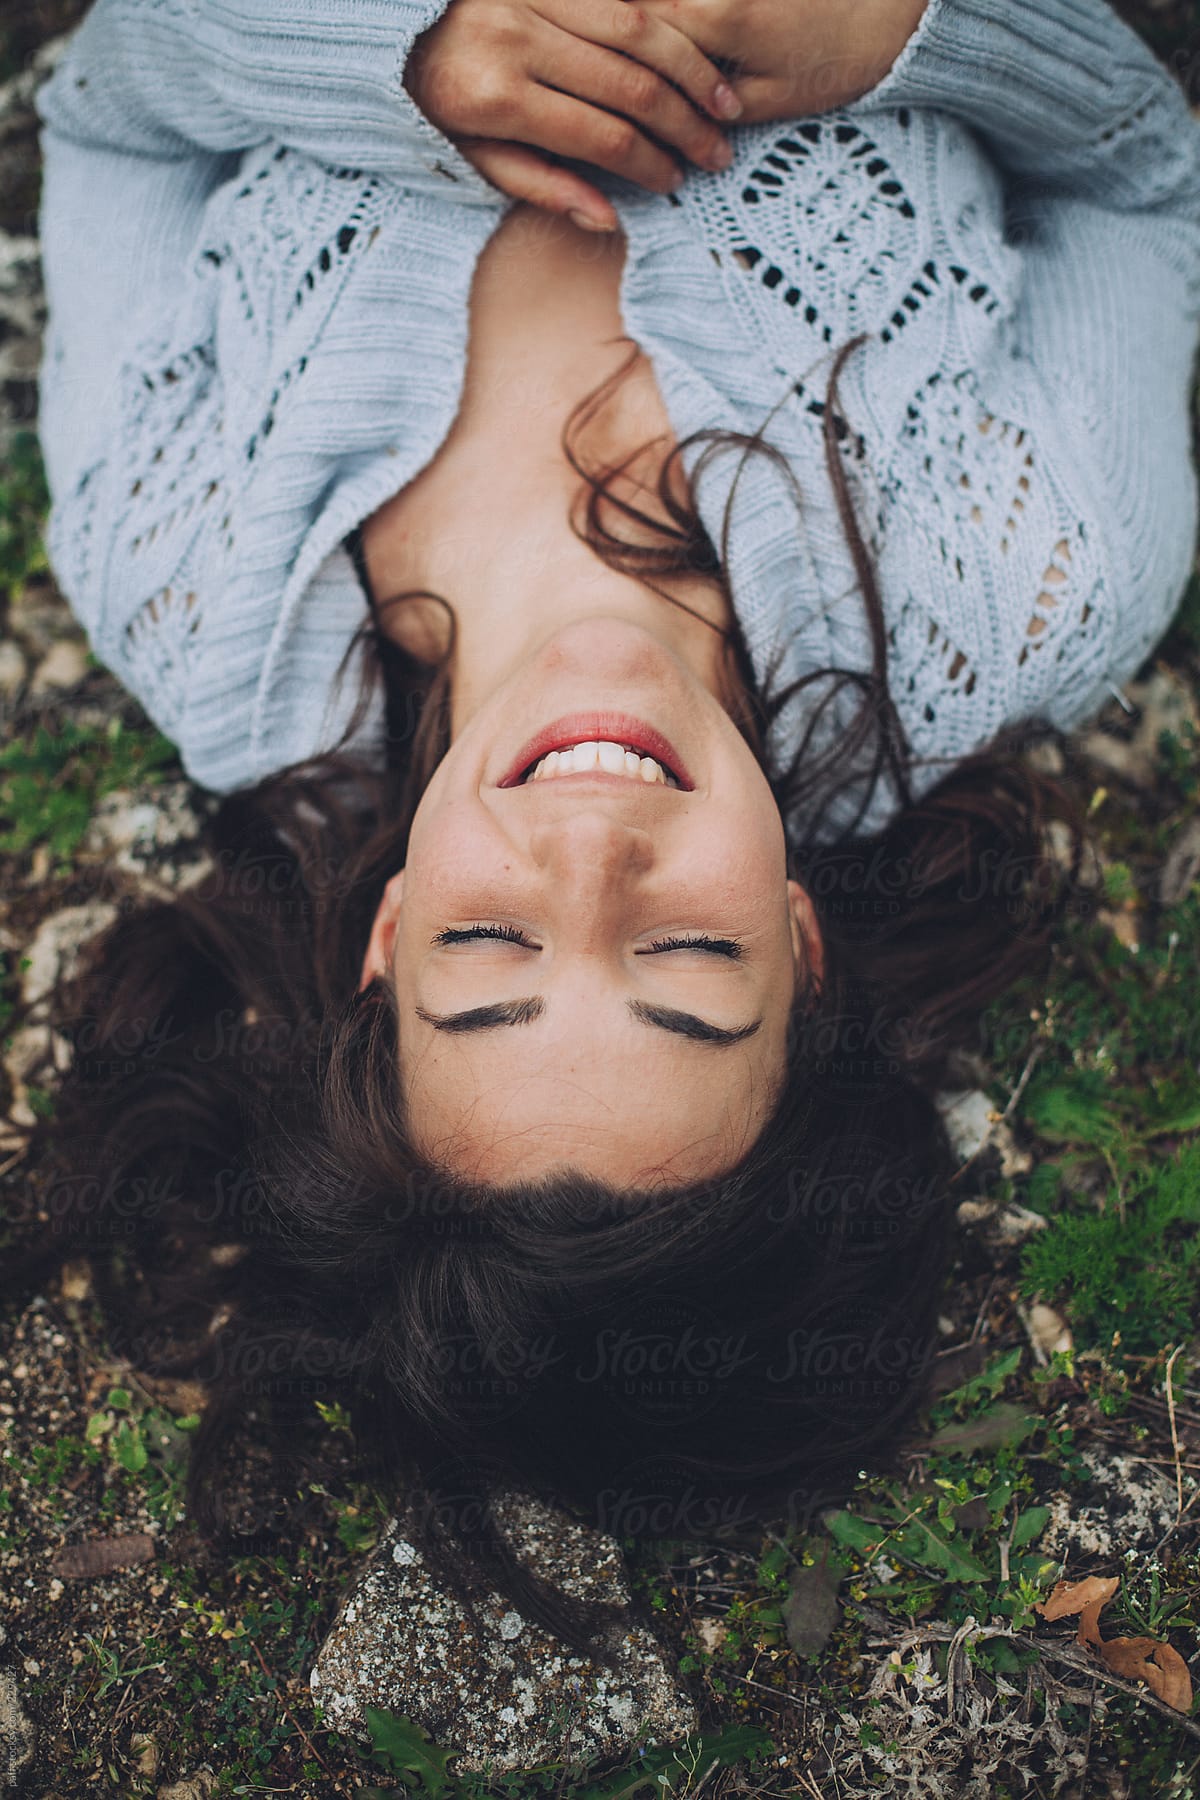 Pretty Girl Lying On The Ground Smiling By Stocksy Contributor Paff Stocksy